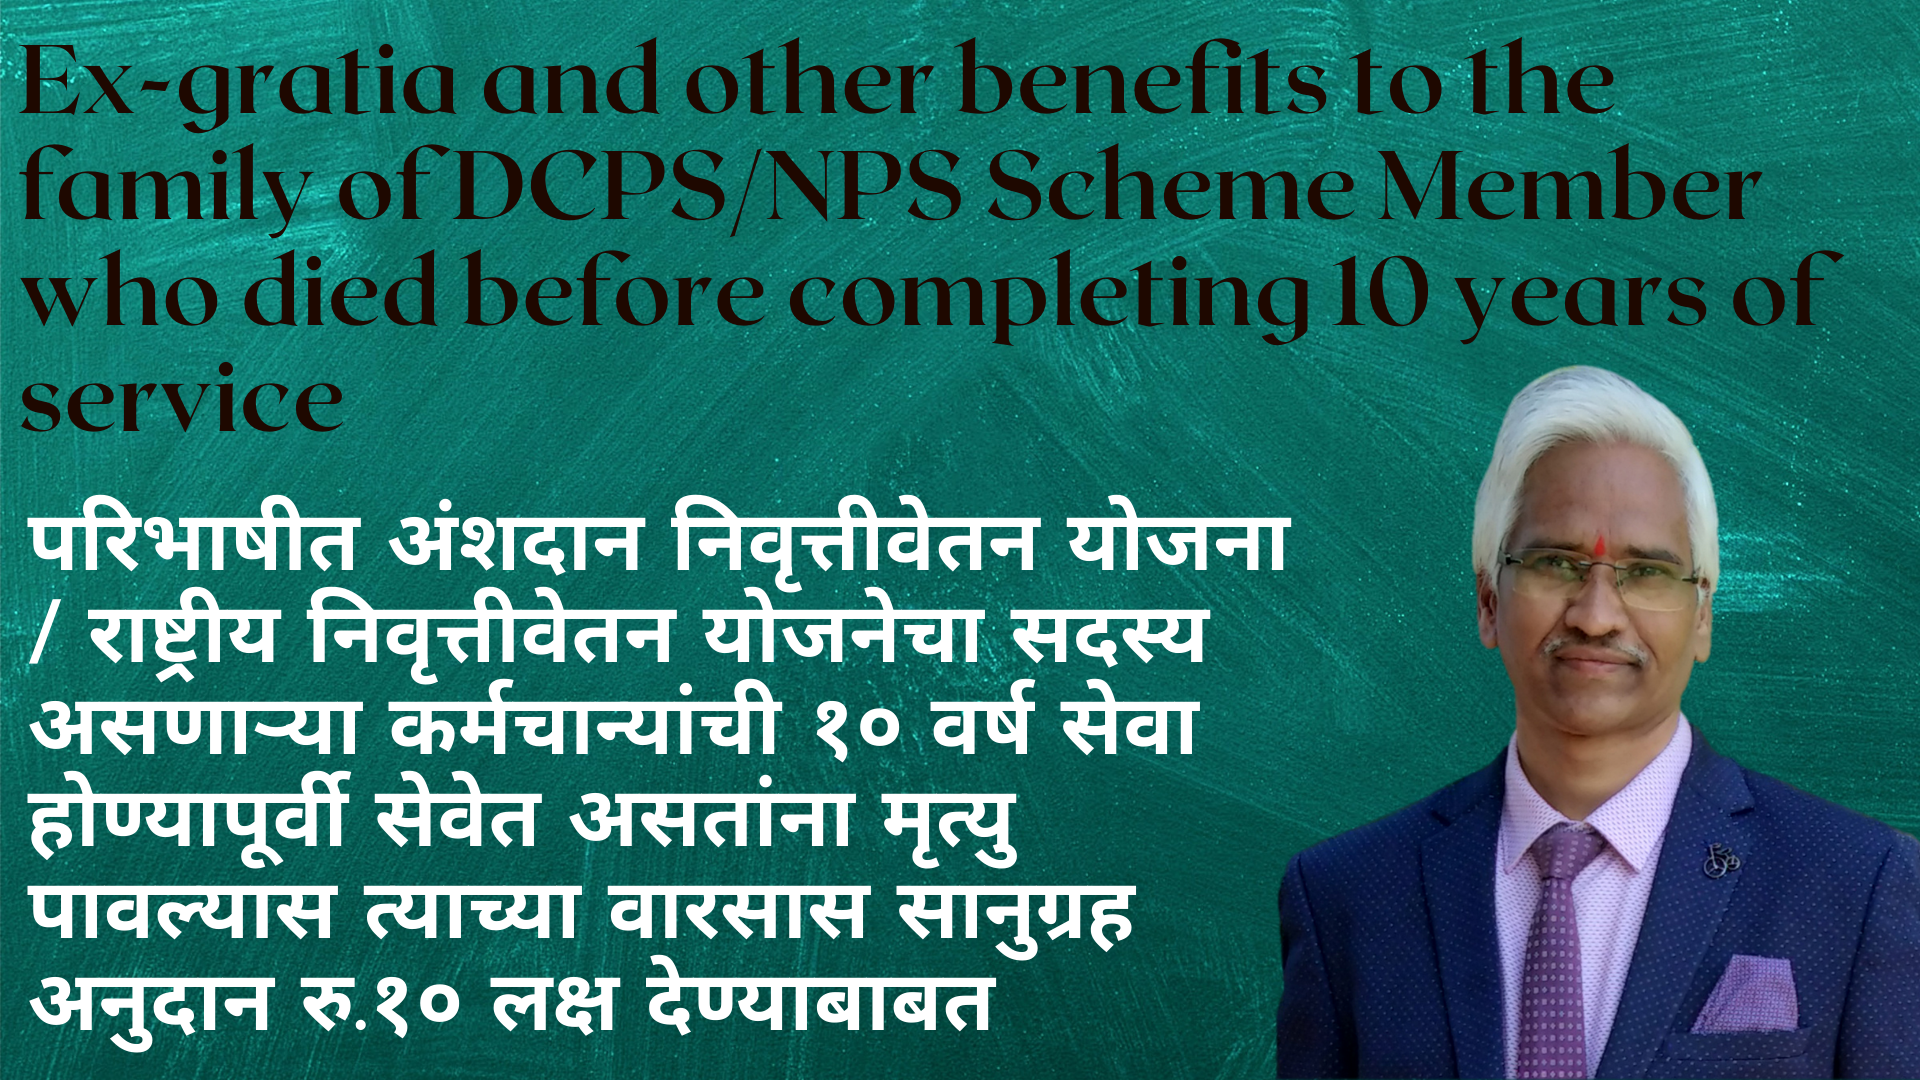 DCPS/NPS Scheme Member who died before completing 10 years of service